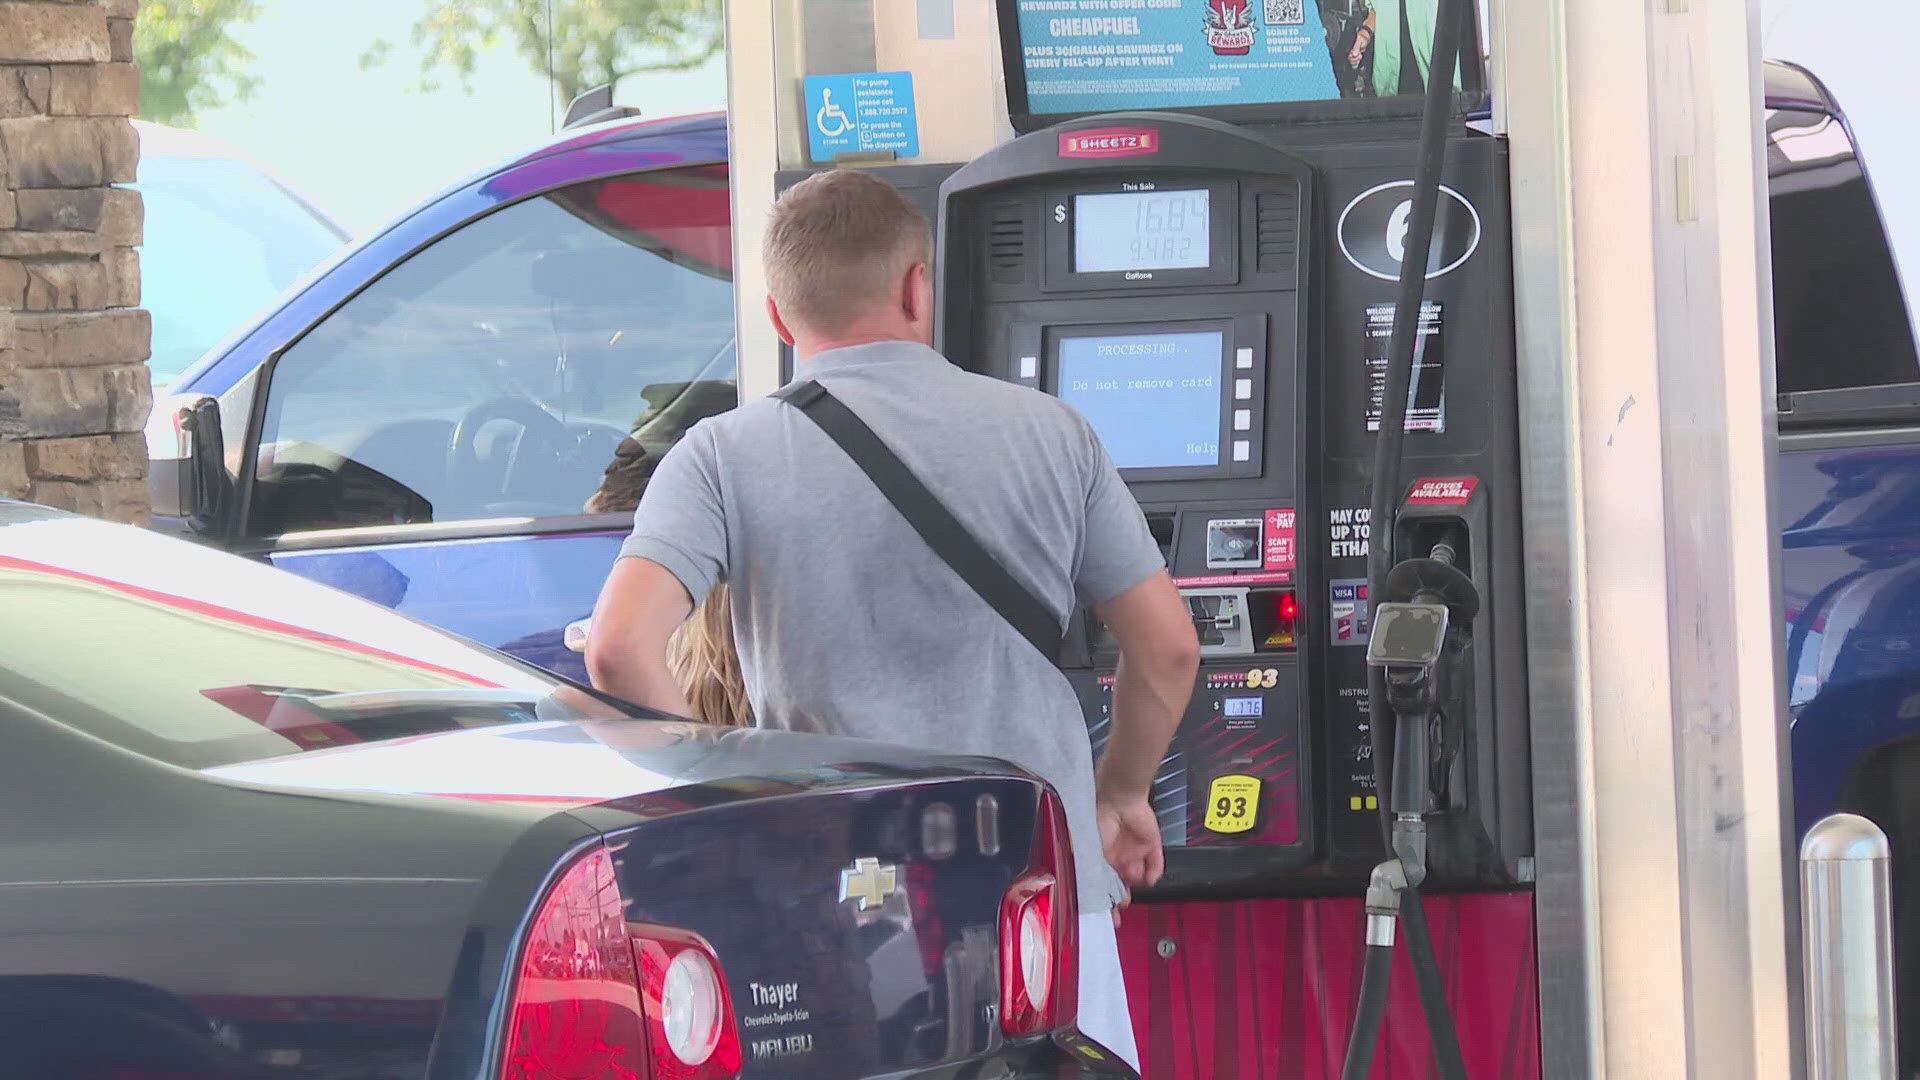 'With summer now officially here, we've seen the national average price of gasoline holding most steady compared to last week.'